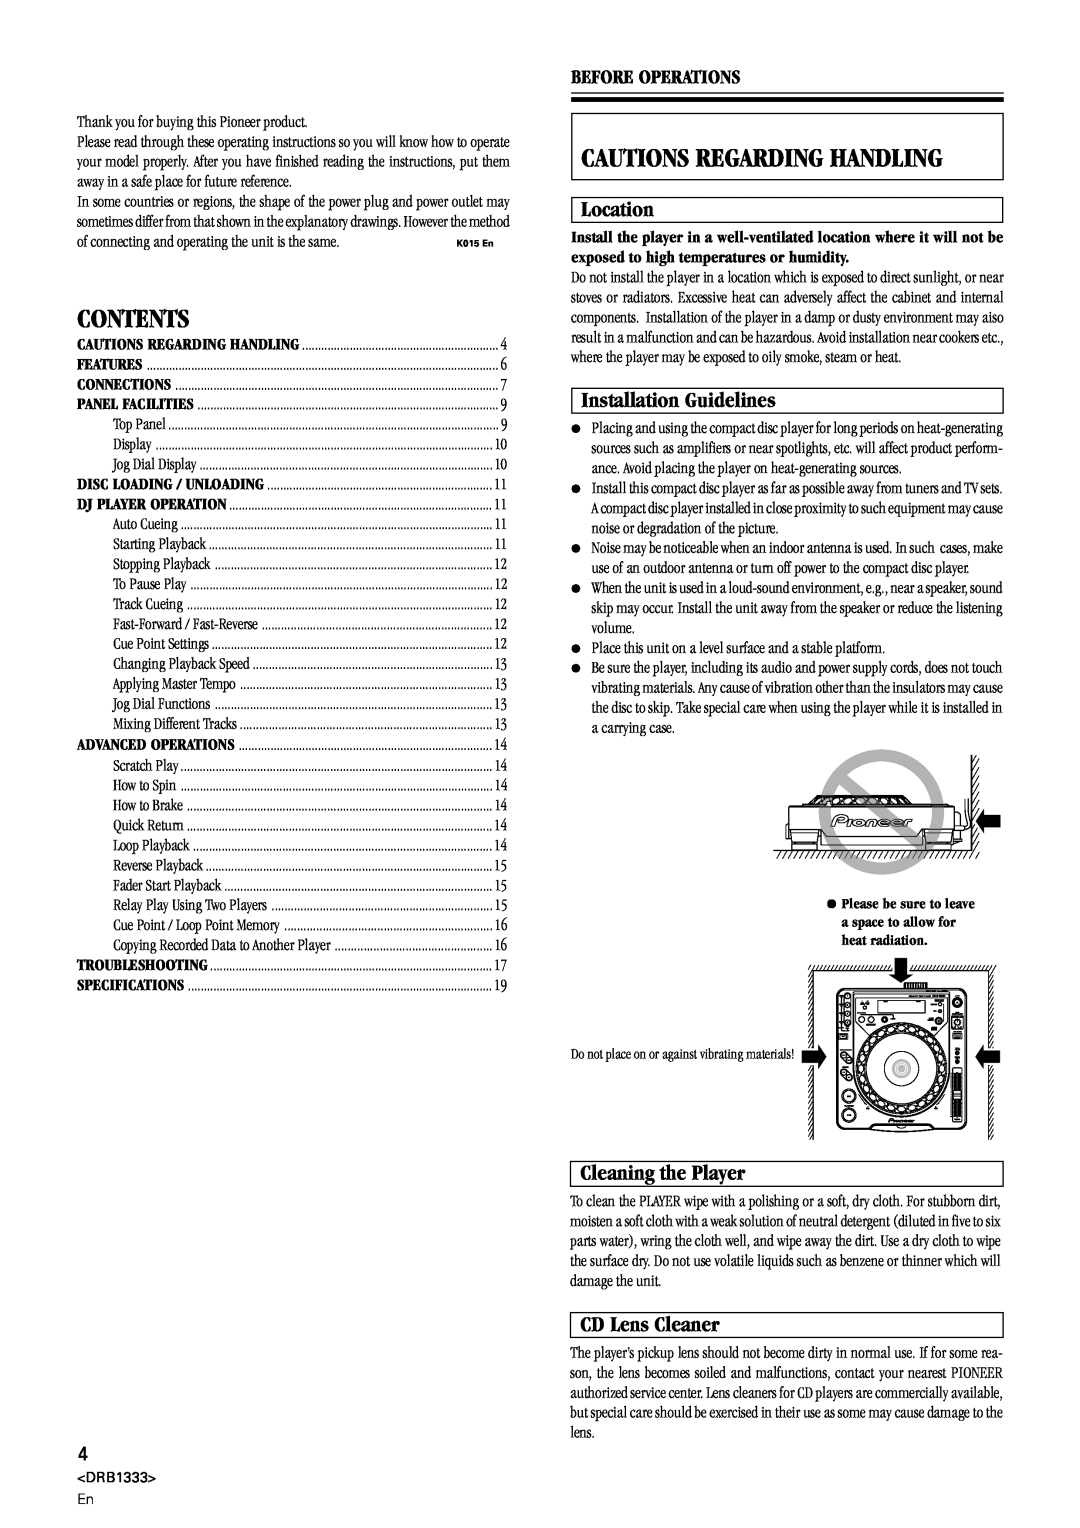 Pioneer CDJ-800 manual Cautions Regarding Handling, Location, Installation Guidelines, Cleaning the Player, CD Lens Cleaner 